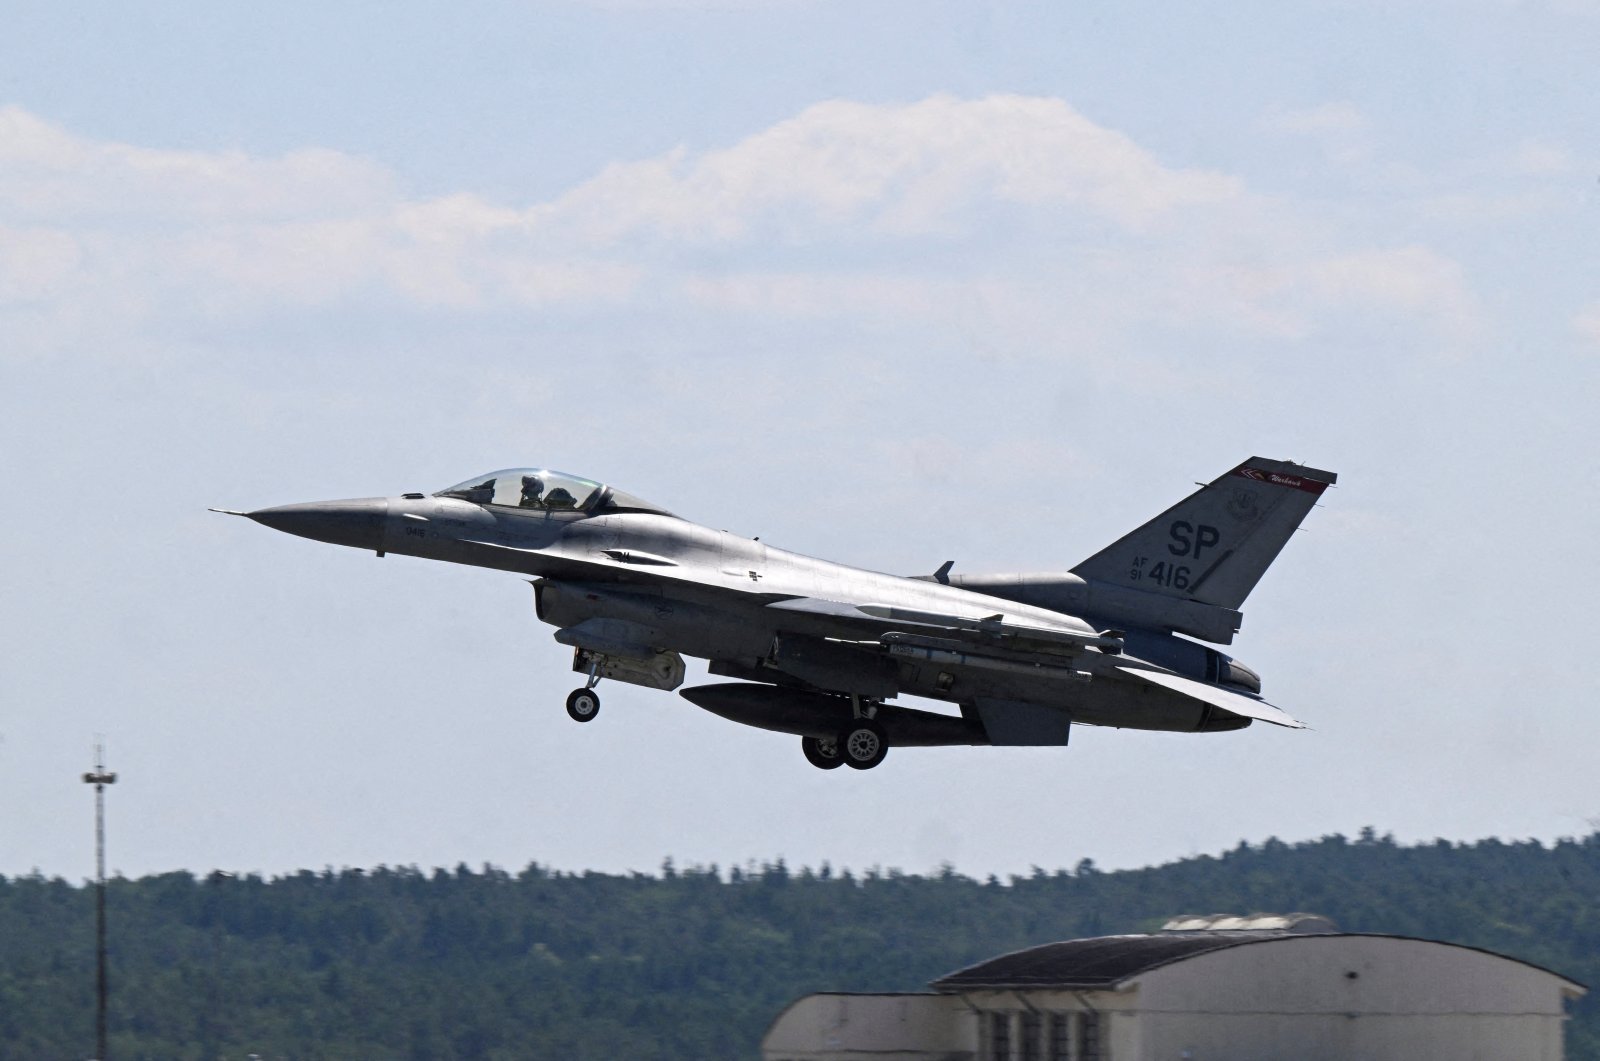 An F-16 fighter jet takes off during a media day of NATO&#039;s &quot;Air Defender 23&quot; military exercise at Spangdahlem U.S. Air Base near the German-Belgian border, Germany, June 14, 2023. (Reuters Photo)